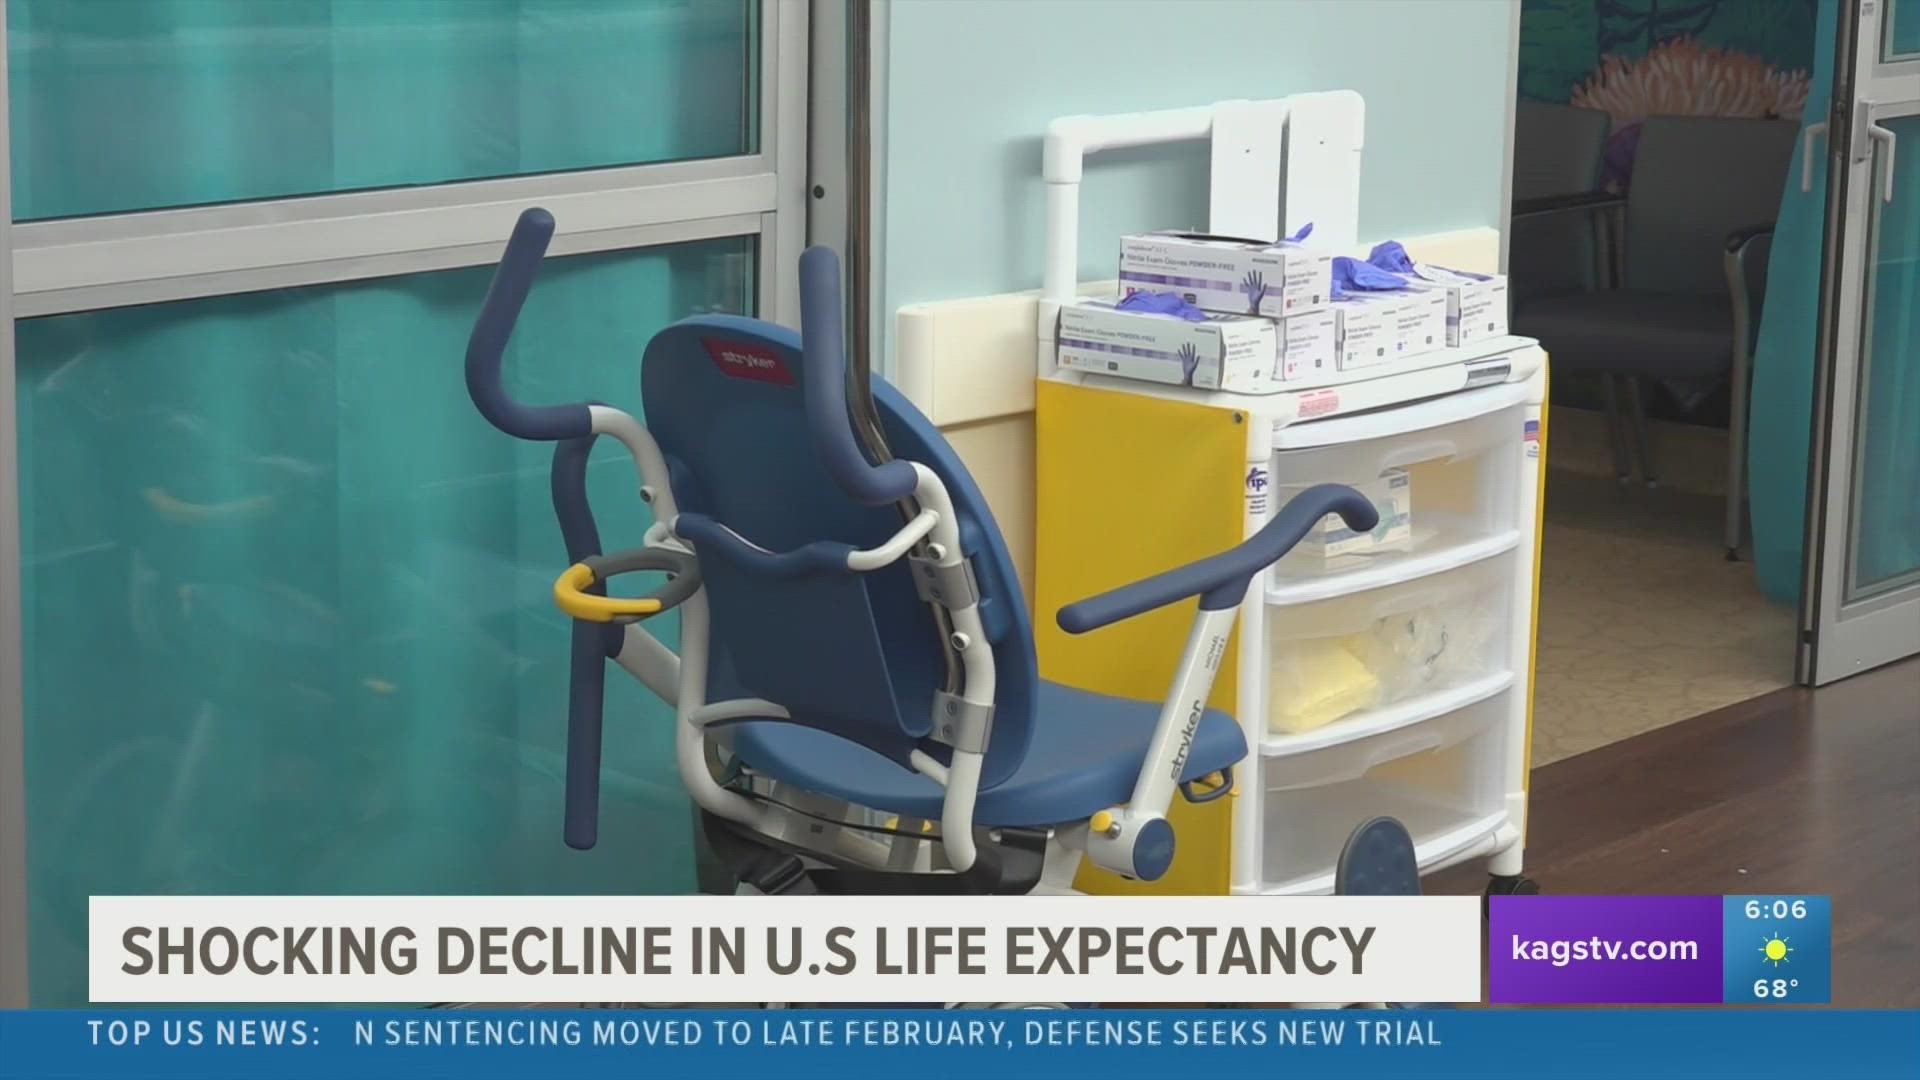 According to a December press release from the CDC, the U.S. life expectancy has decreased for the second year in a row. A local doctor weighs in on the report.